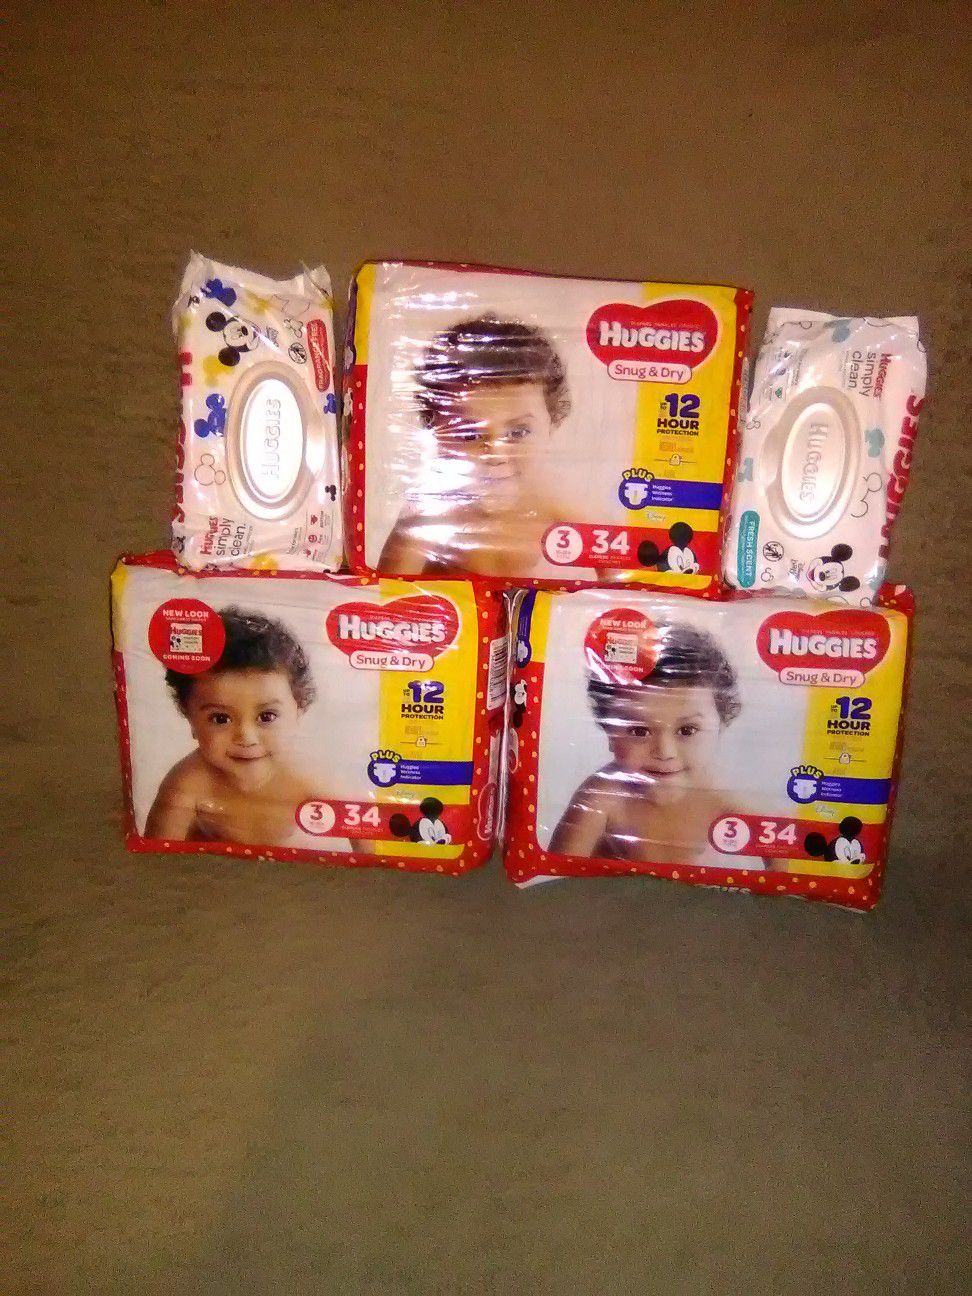 HUGGIES 3 packs size 3 and 2 packs wipes